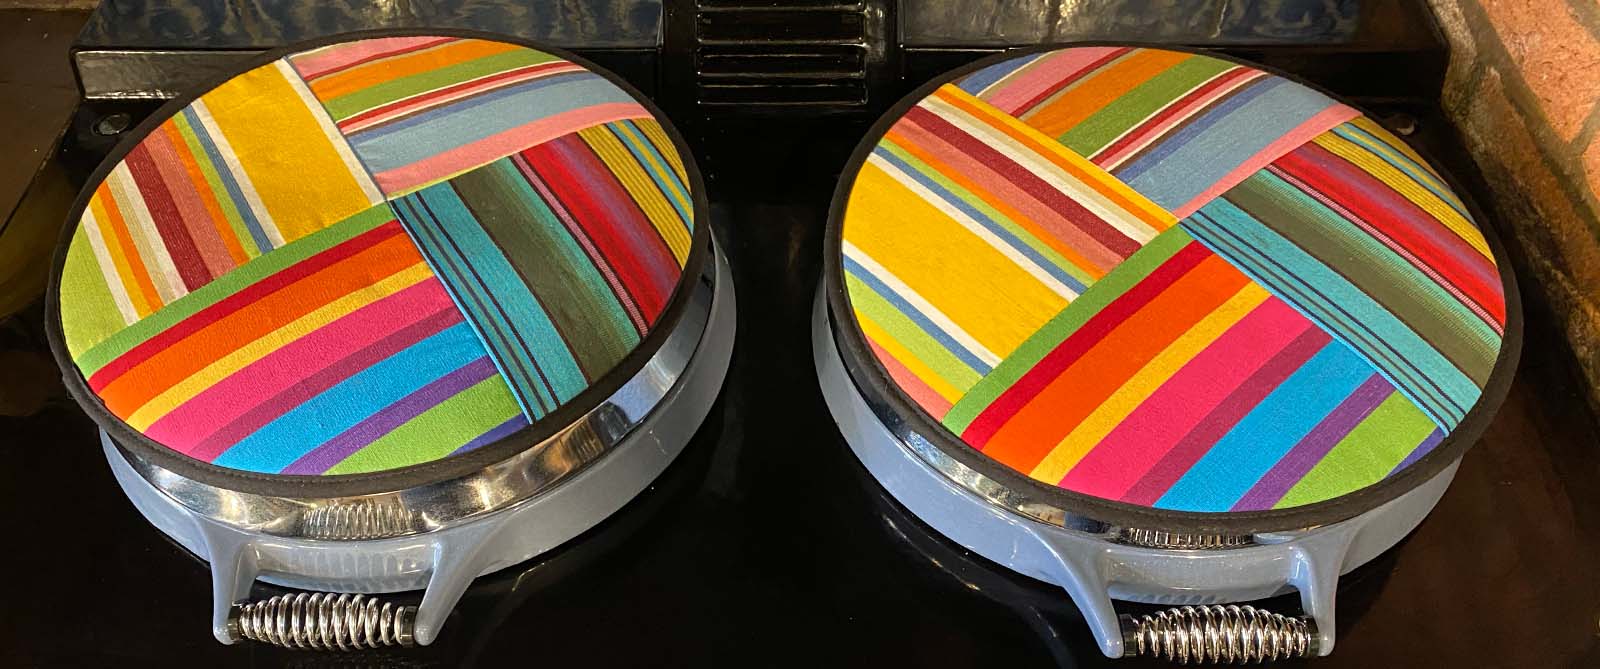 Striped Hob Covers for Agas | Range Cooker Hob Covers | Round Hob Protectors | Chefs Pads